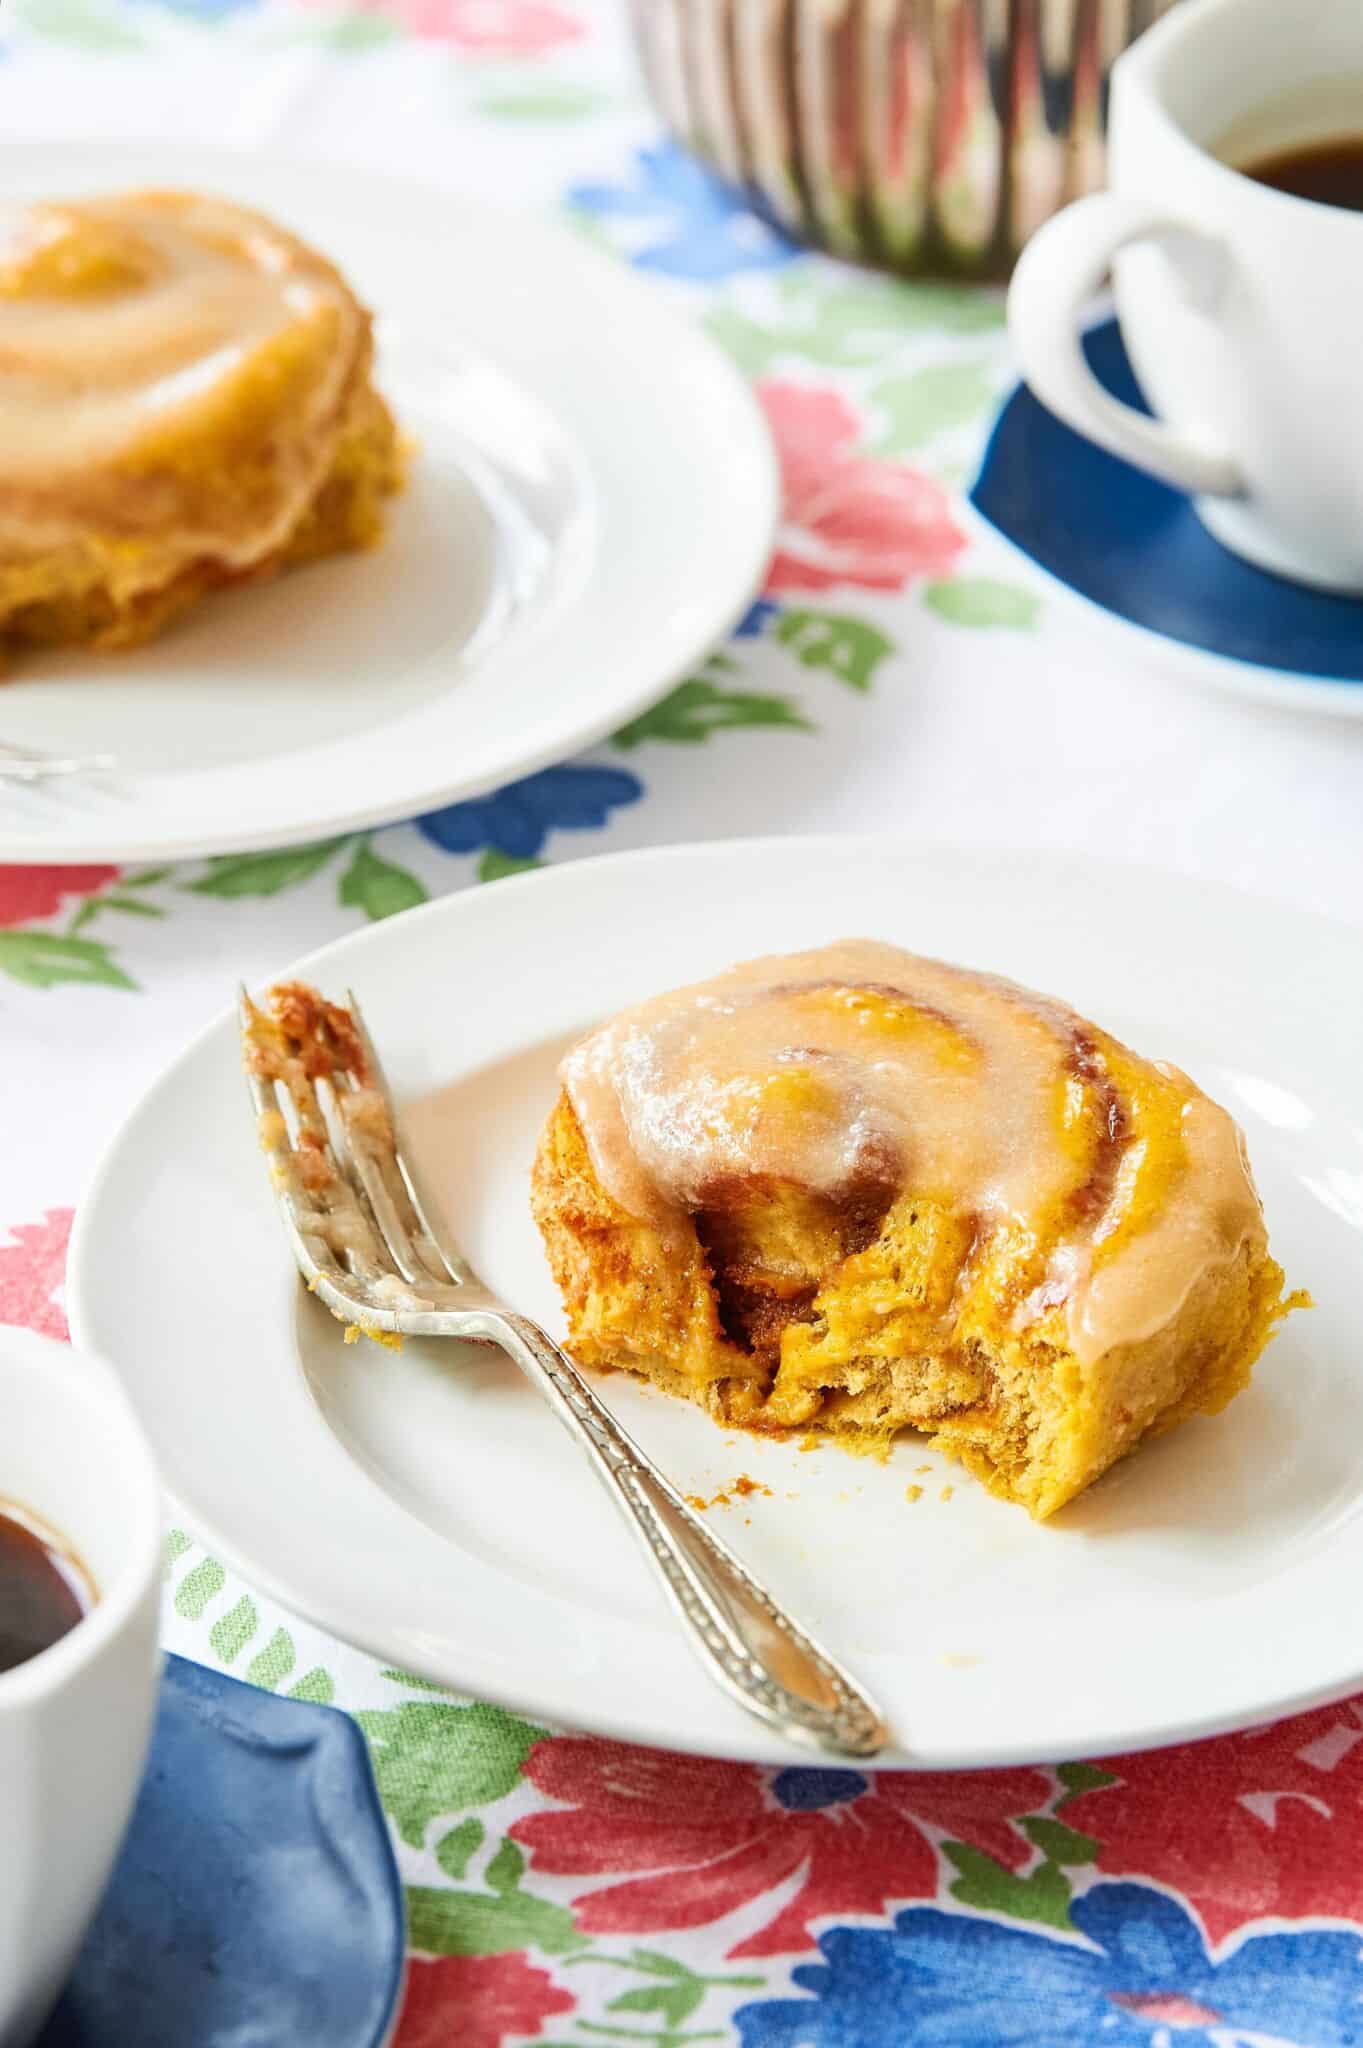 Two Pumpkin Cinnamon Rolls are served on two plates and one roll has been taken a bite. The rolls have pumpkin-infused golden orange color, are slightly crispy on the edges but very moist and soft on the inside. It's topped with cream cheese glaze and served with coffee.